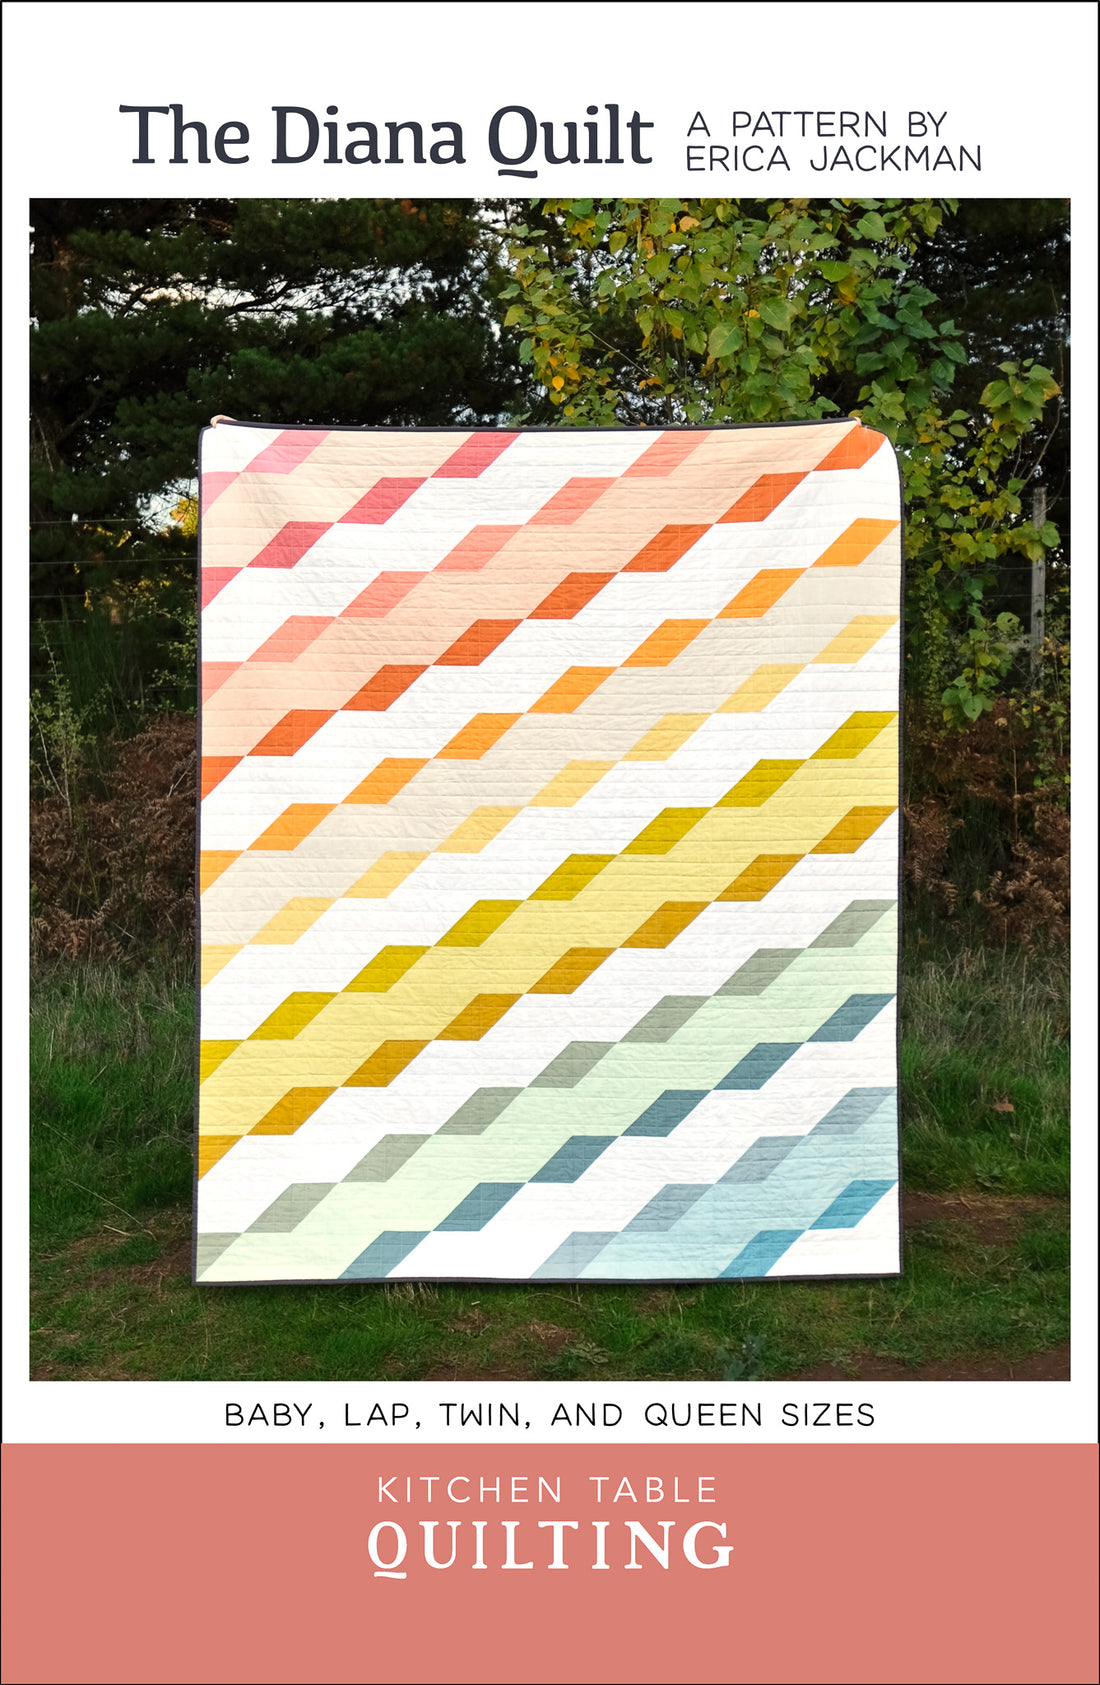 The Diana Quilt PDF Pattern